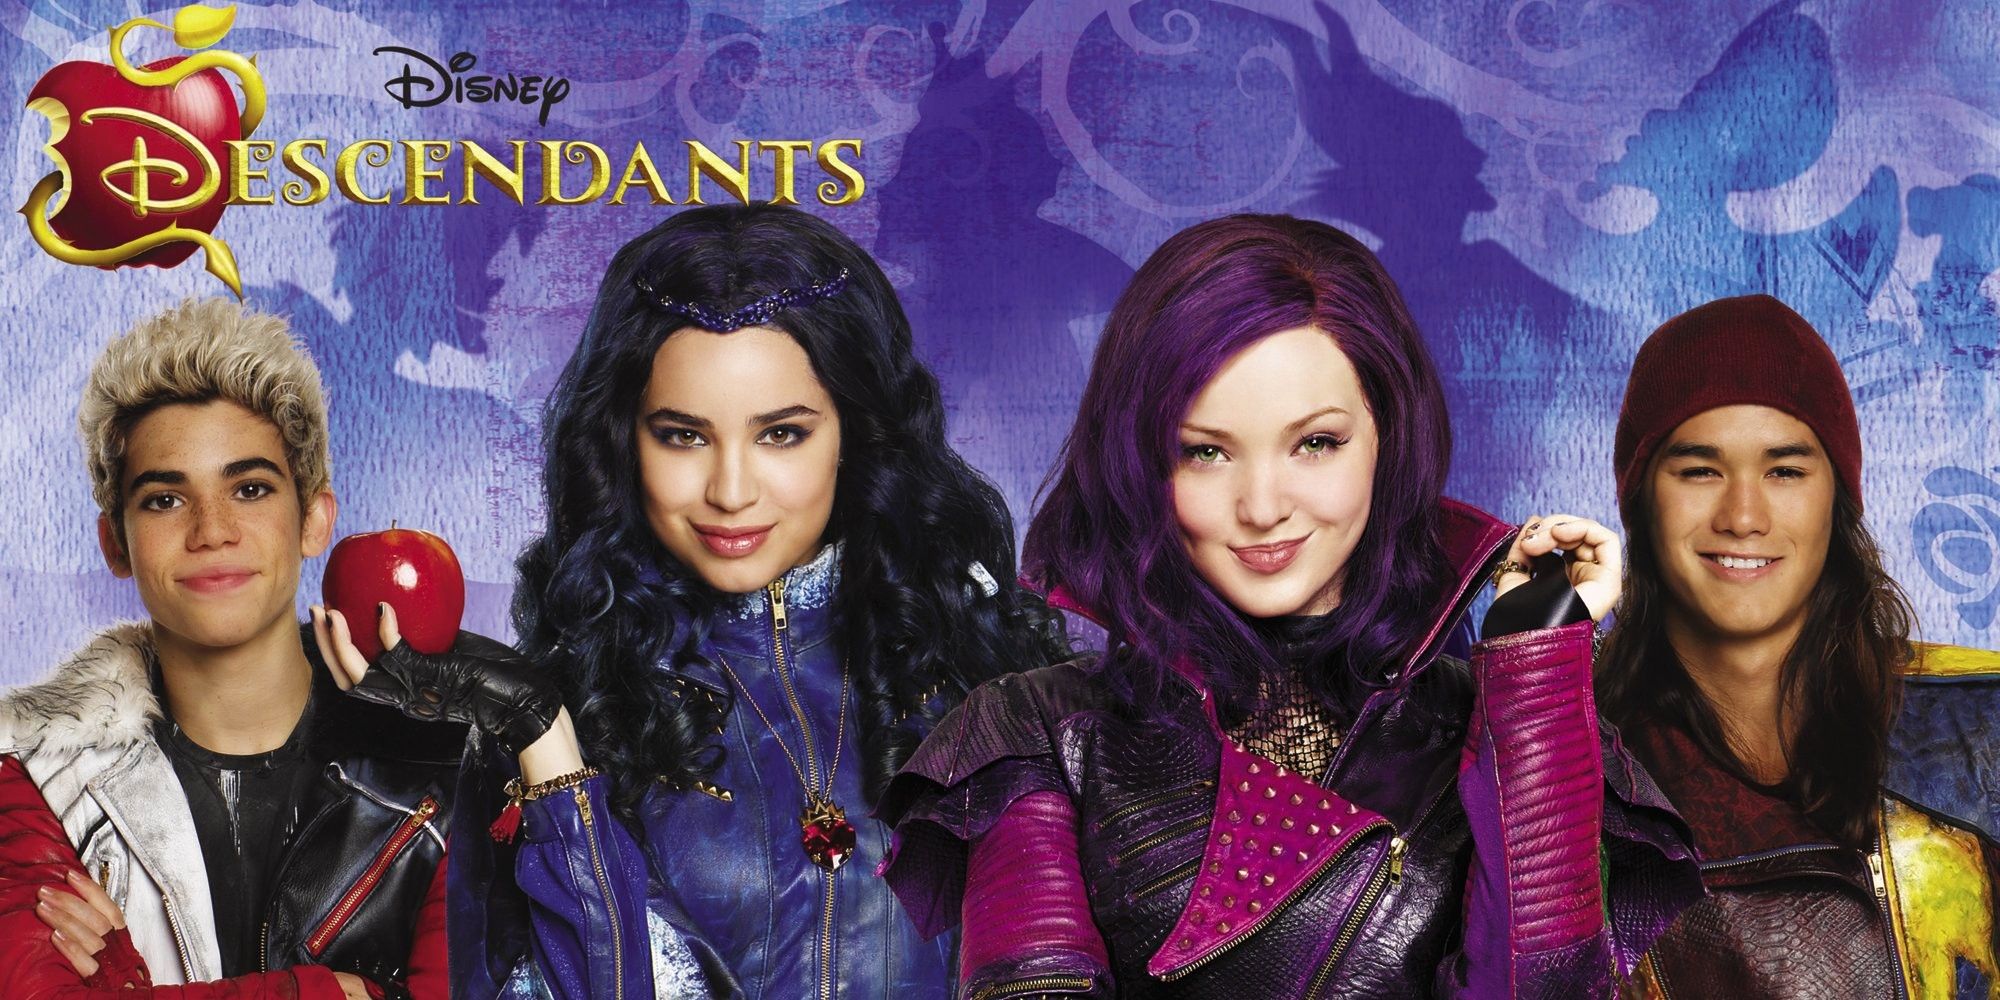 Disney Descendants poster with Carlos Evie Mal and Jay